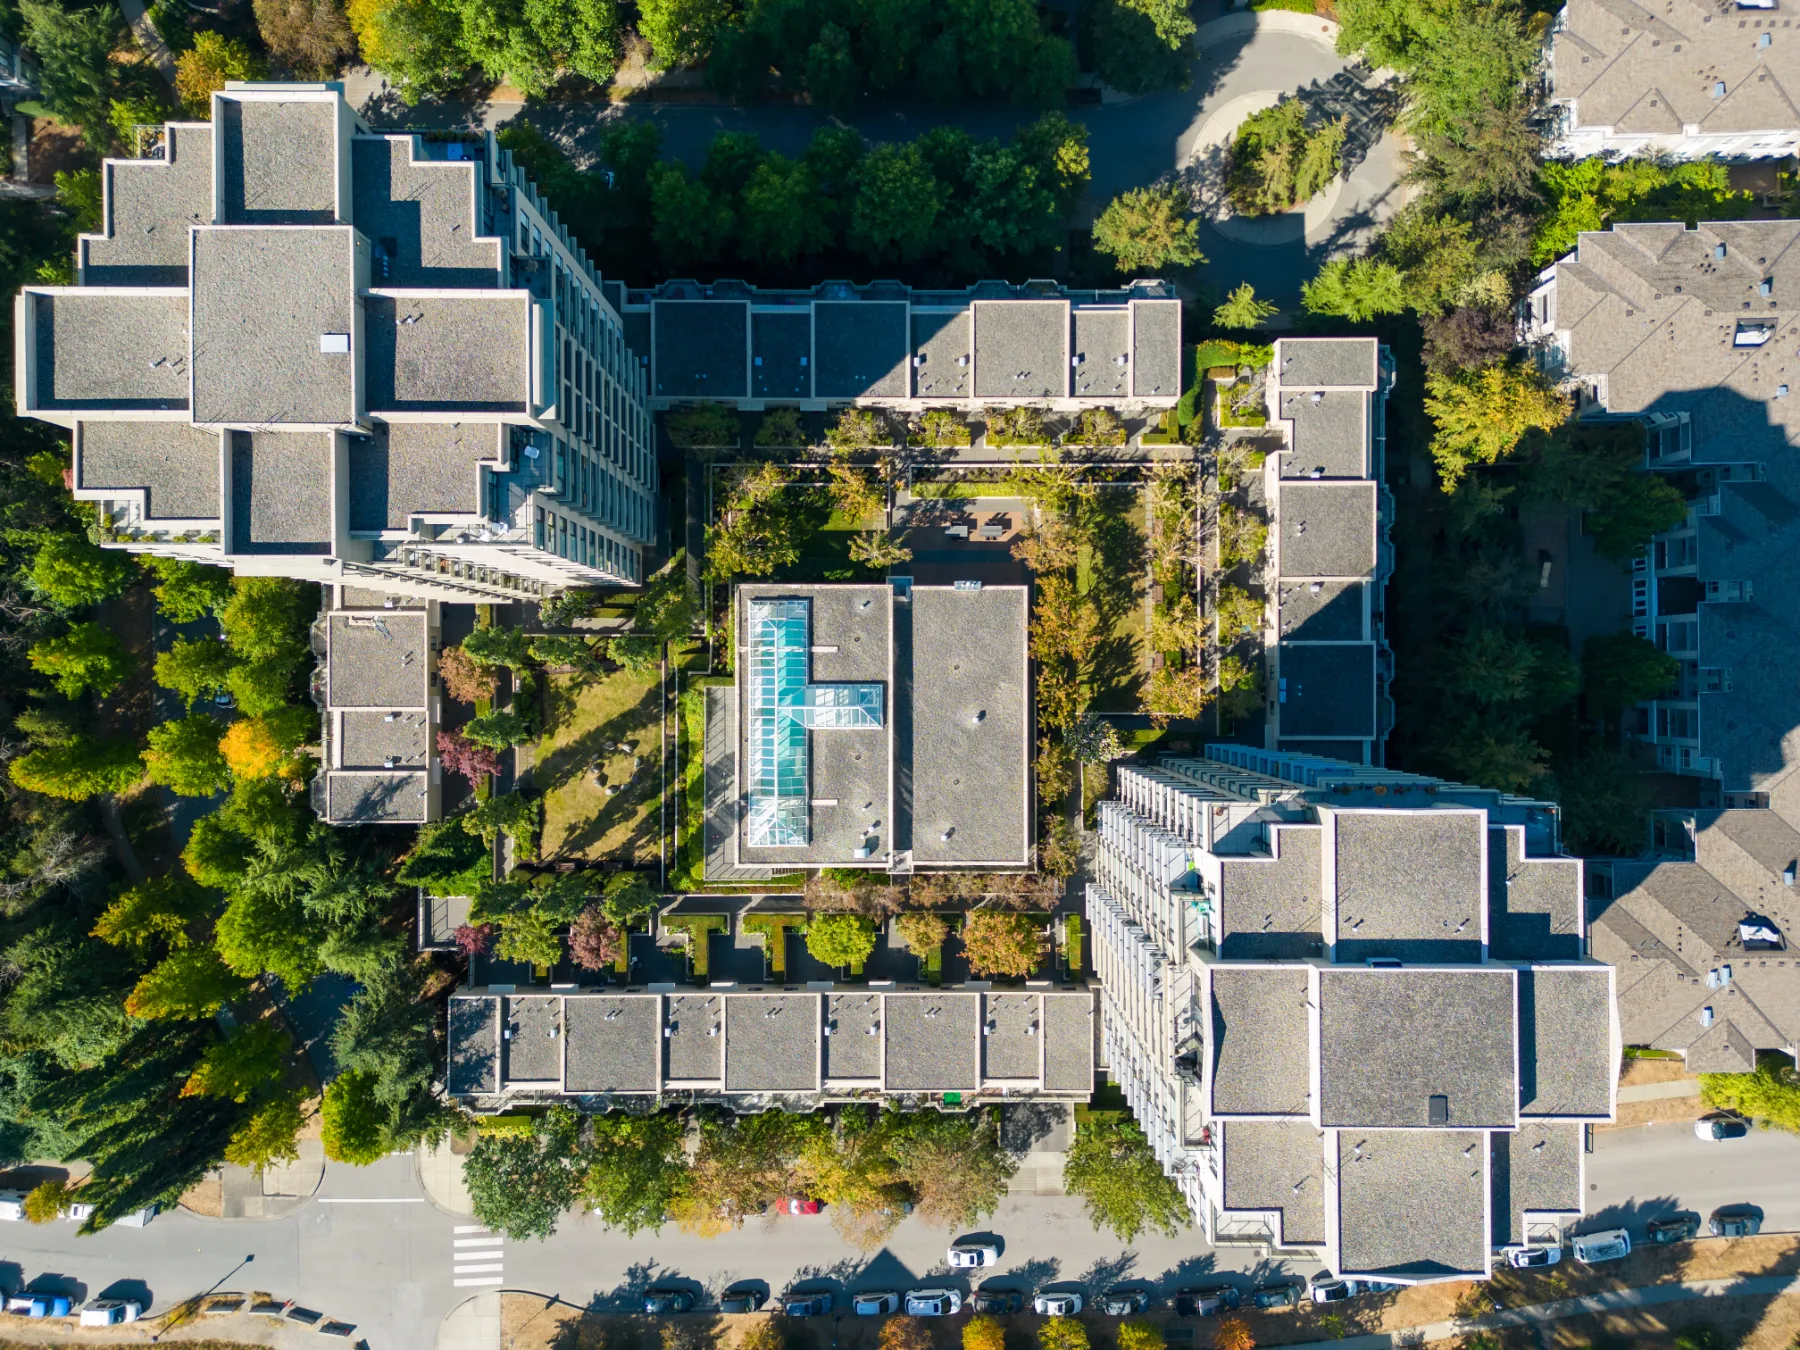 real estate drone photography